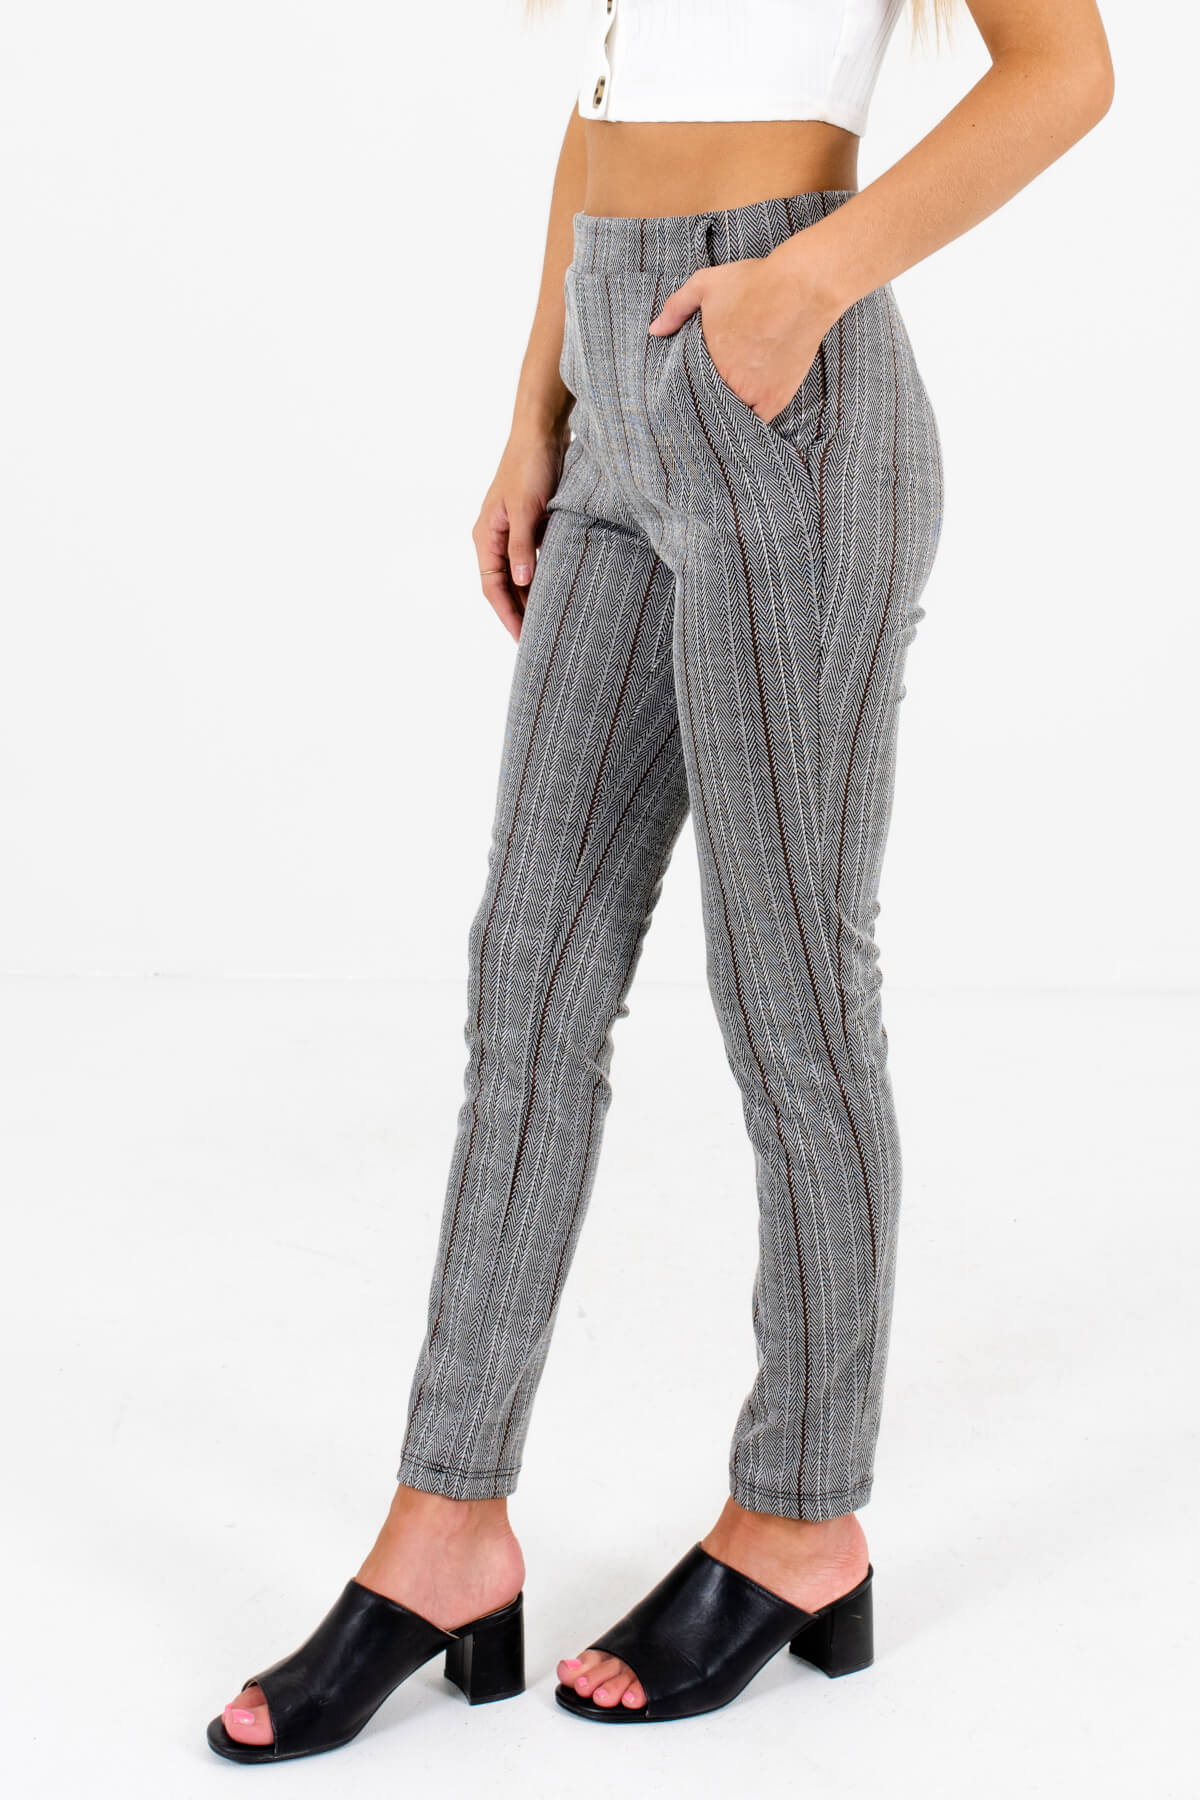 Gray Patterned Boutique Pants with Pockets for Women